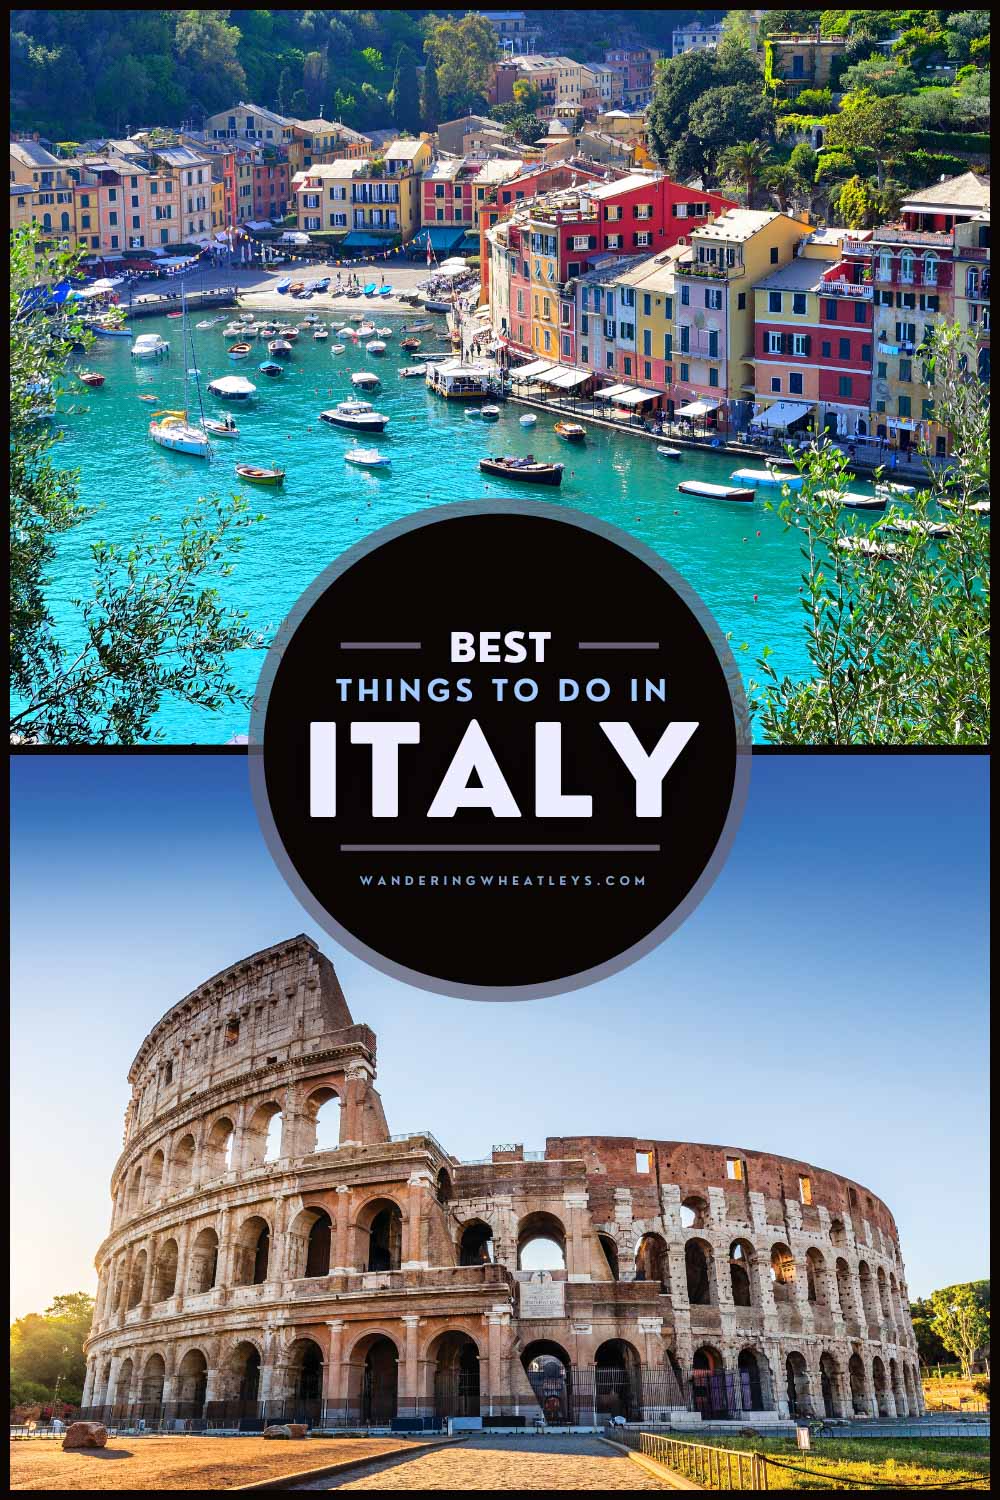 The Best Things to do in Italy